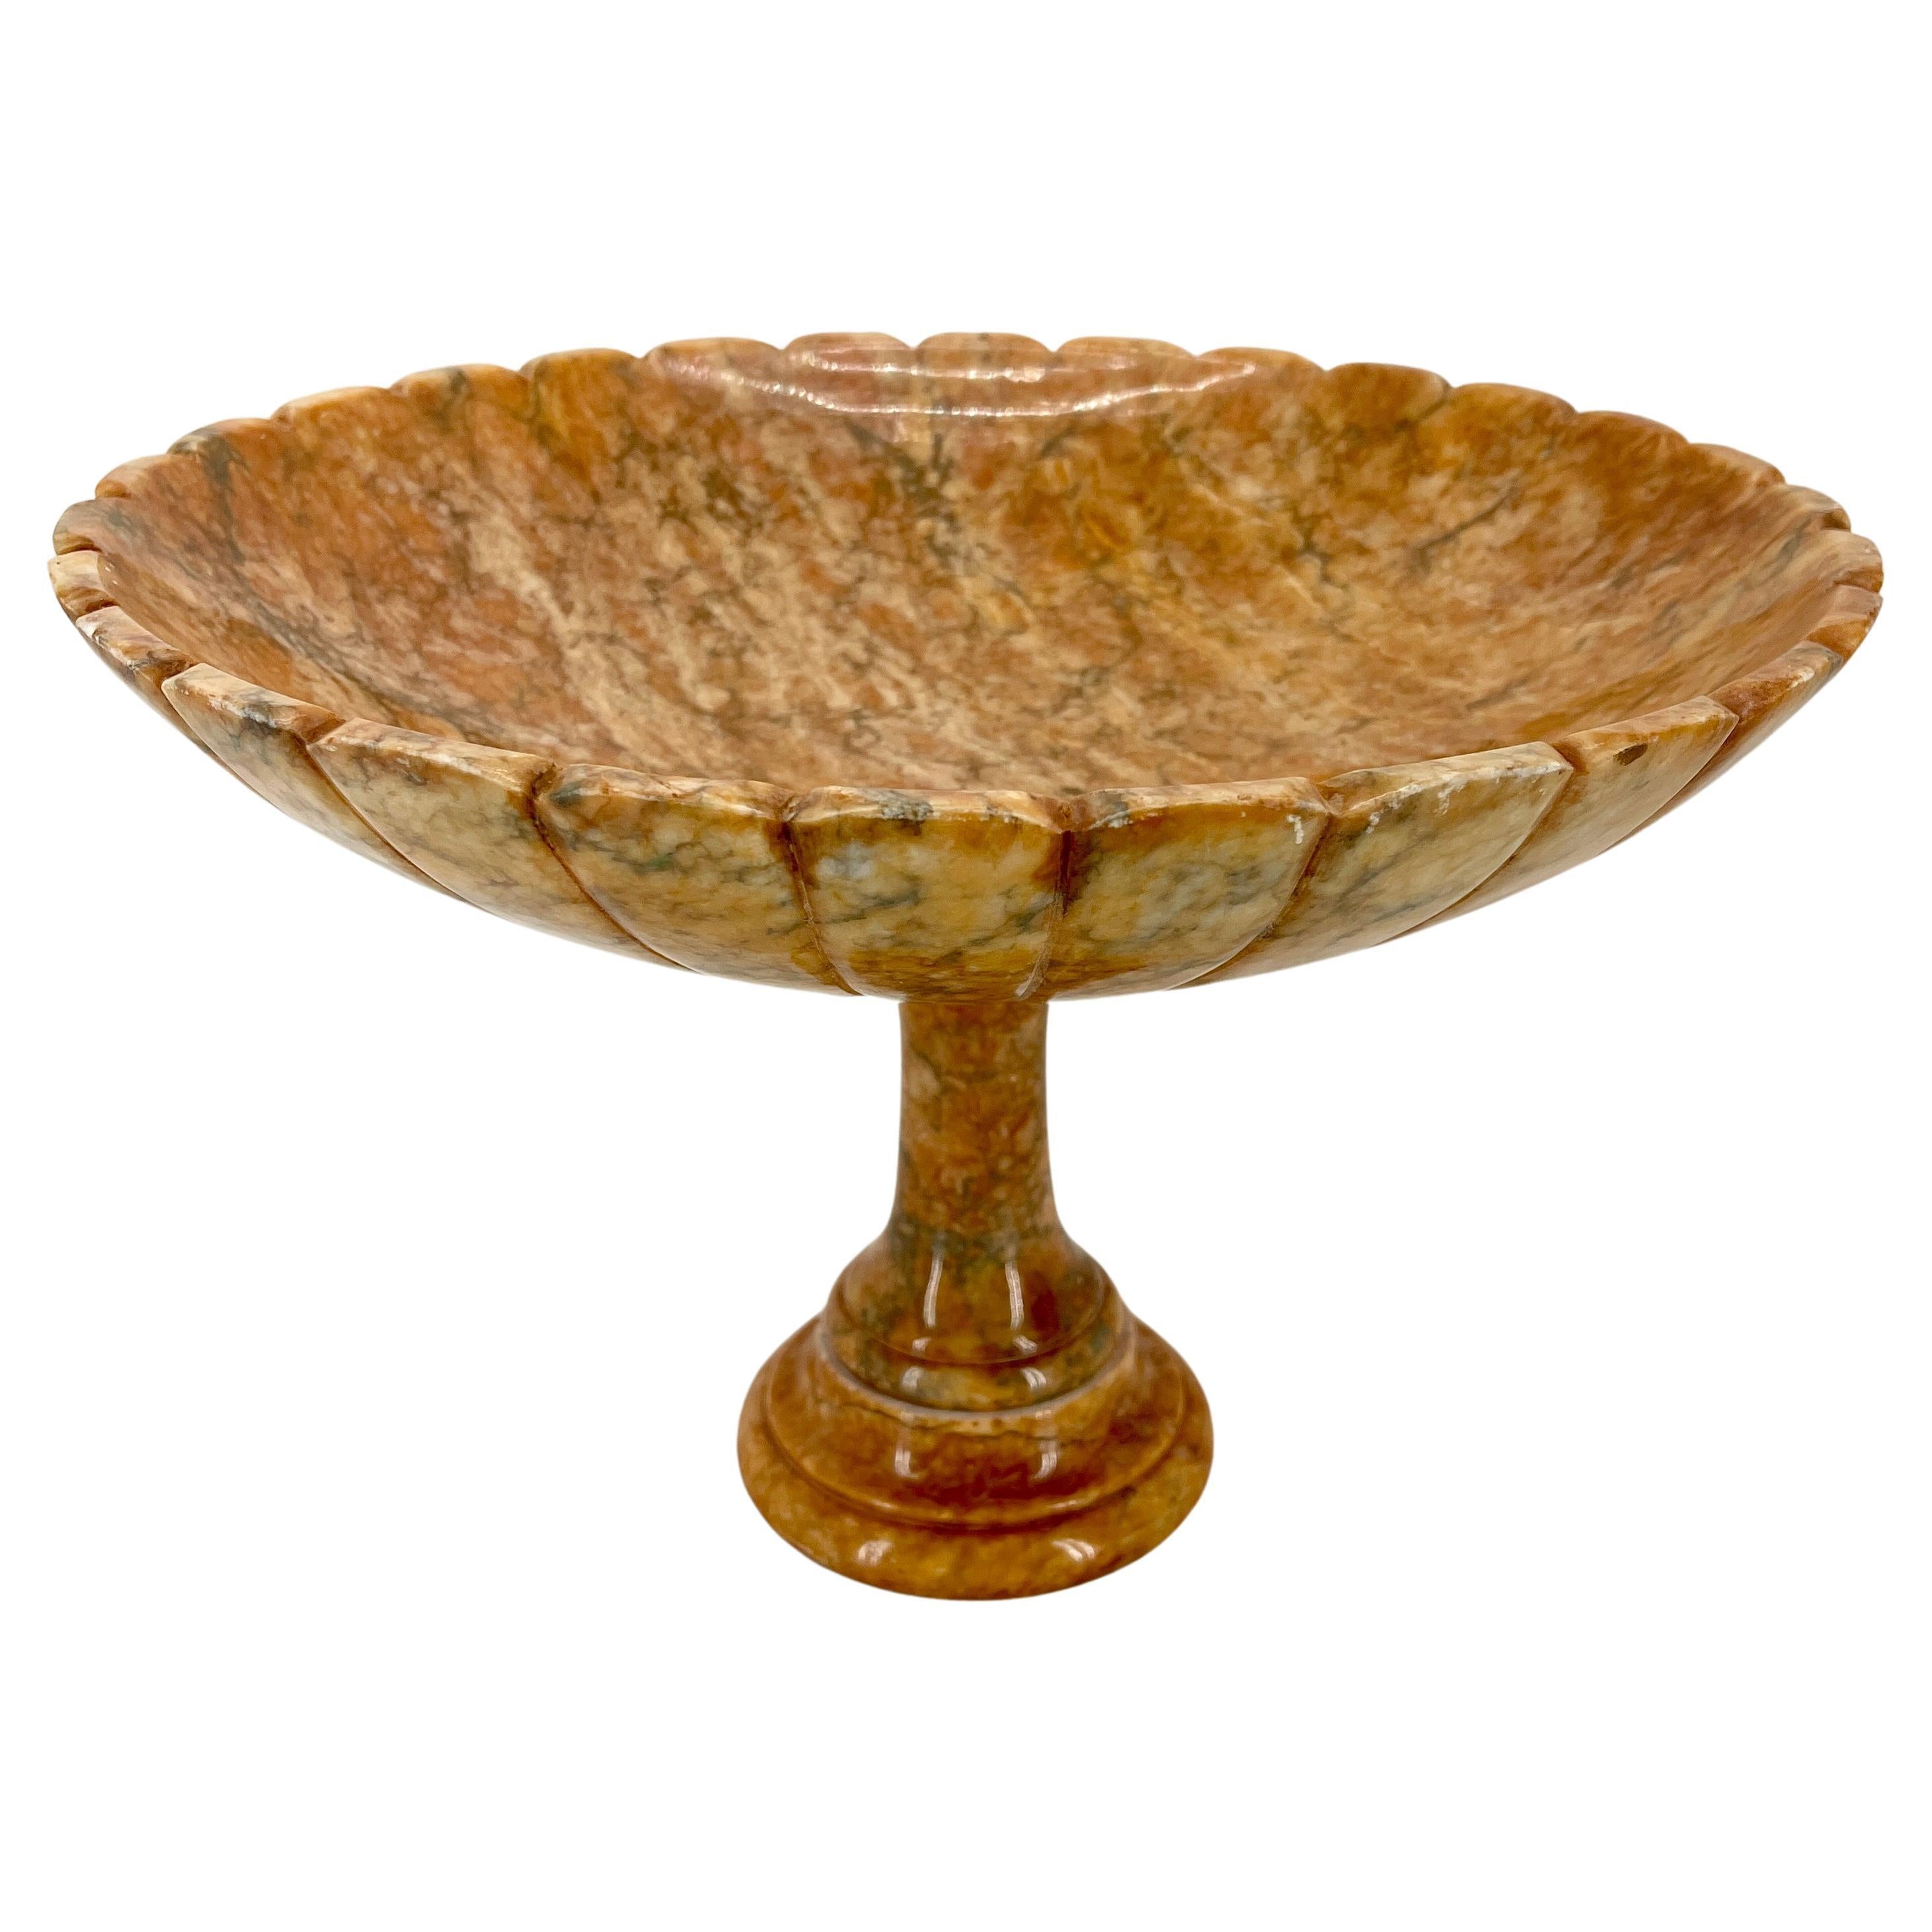 Italian Mid-Century red marble tazza centerpiece stand sculpture.
Fruit bowl in red alabaster footed compote.